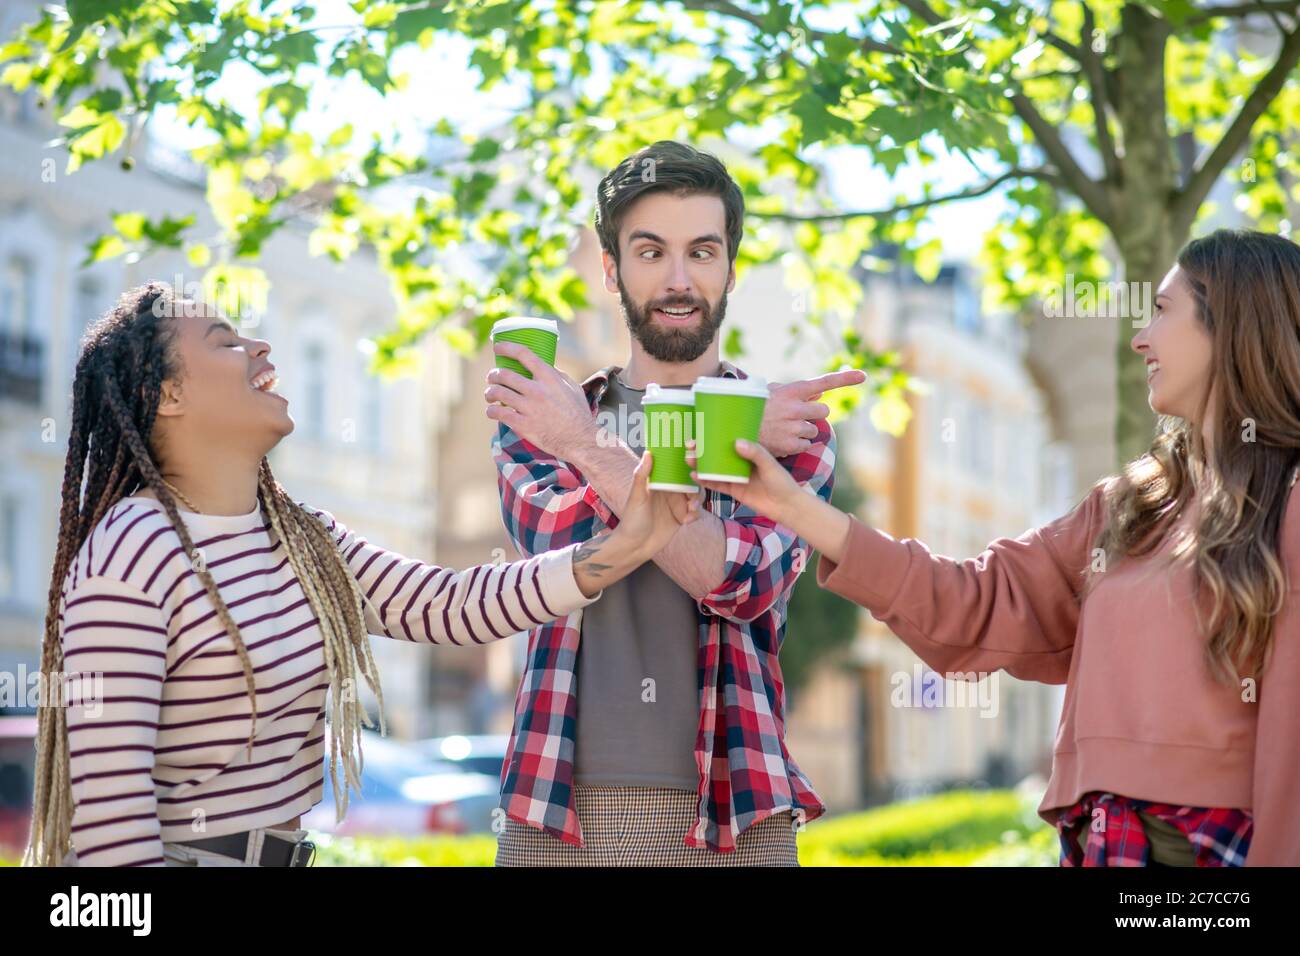 Joking cross-eyed guy and two laughing girls standing on street Stock Photo